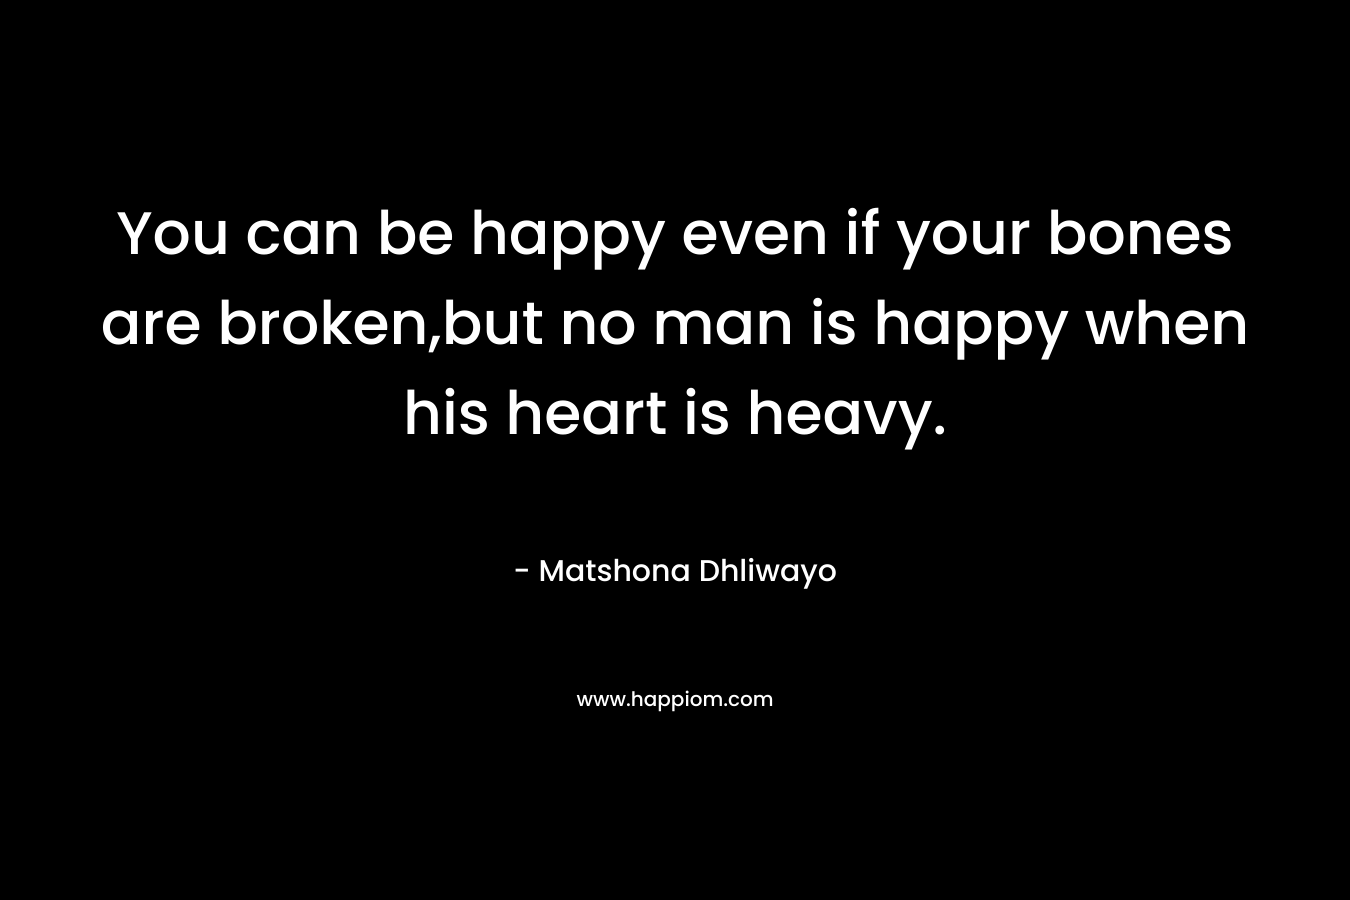 You can be happy even if your bones are broken,but no man is happy when his heart is heavy.